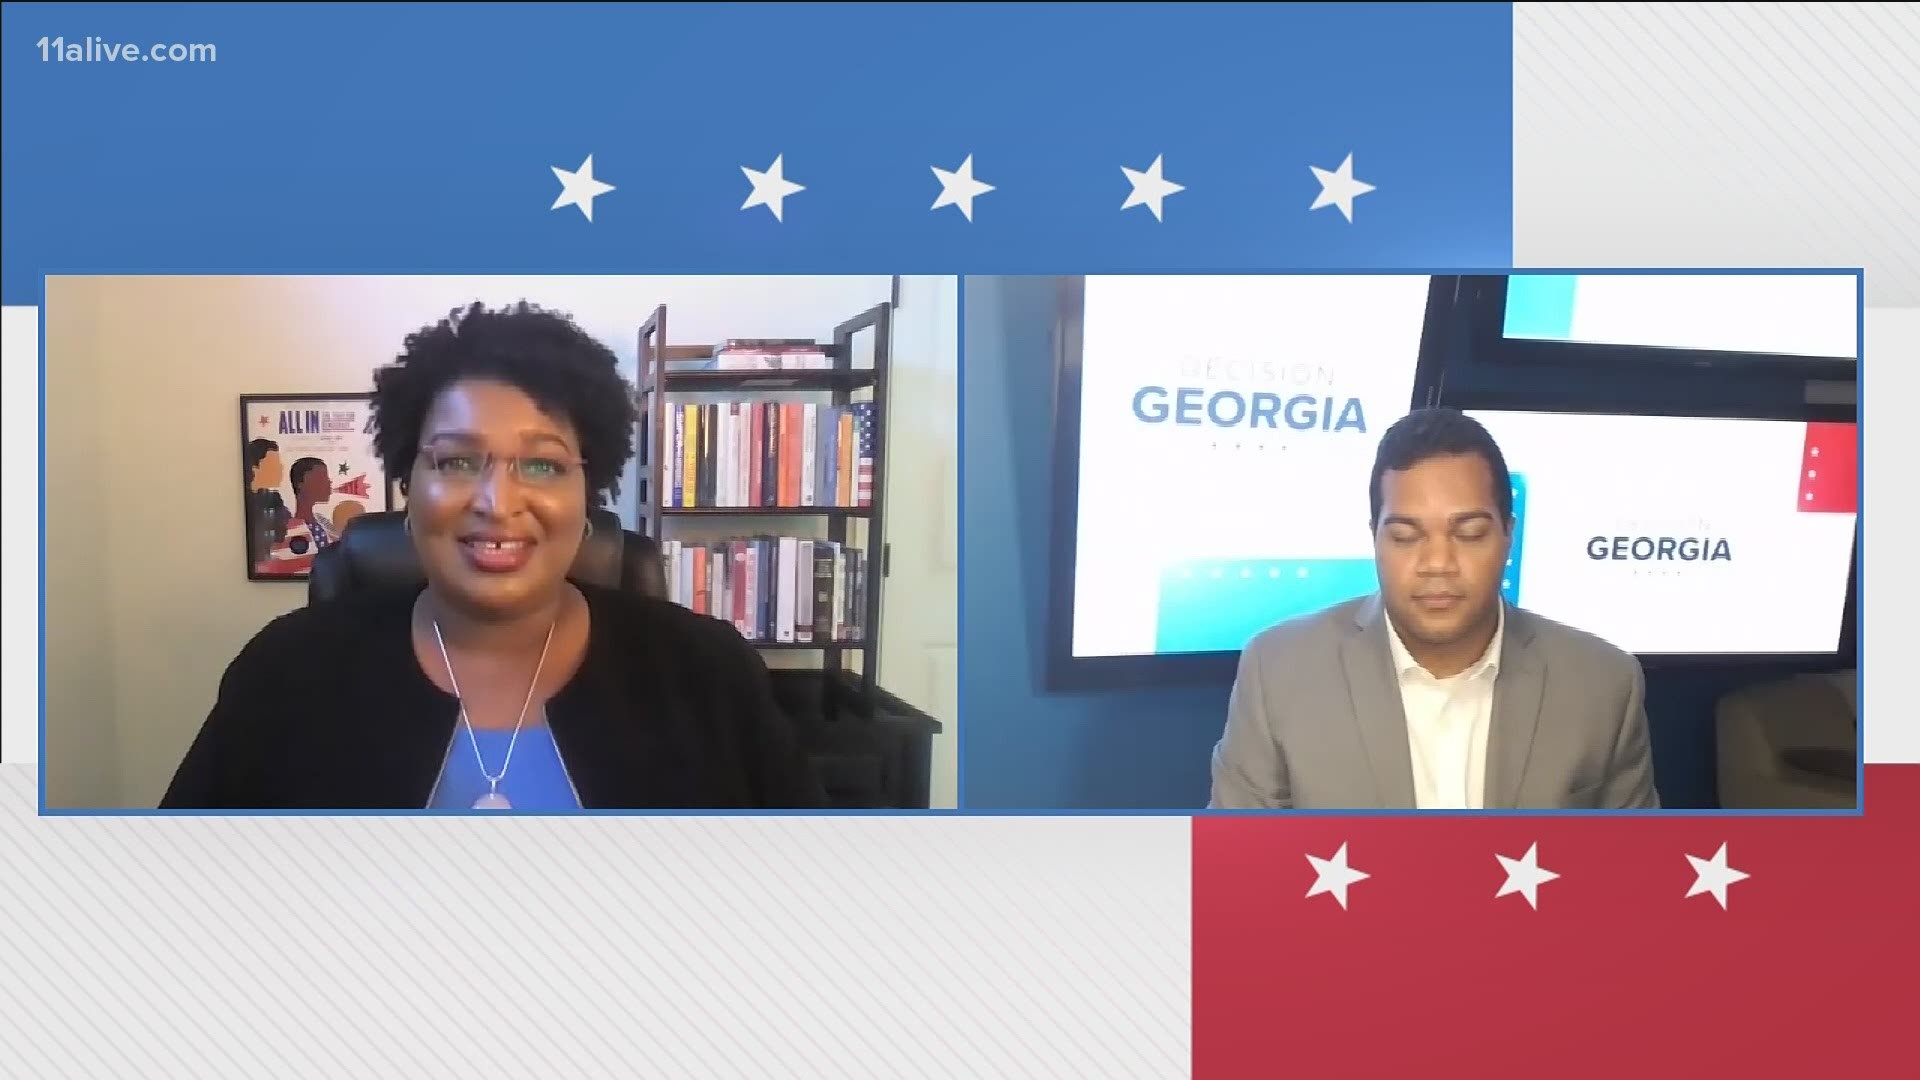 Stacey Abrams, founder of Fair Fight Action, said the results will directly impact how effective President-elect Joe Biden can be when he takes office.